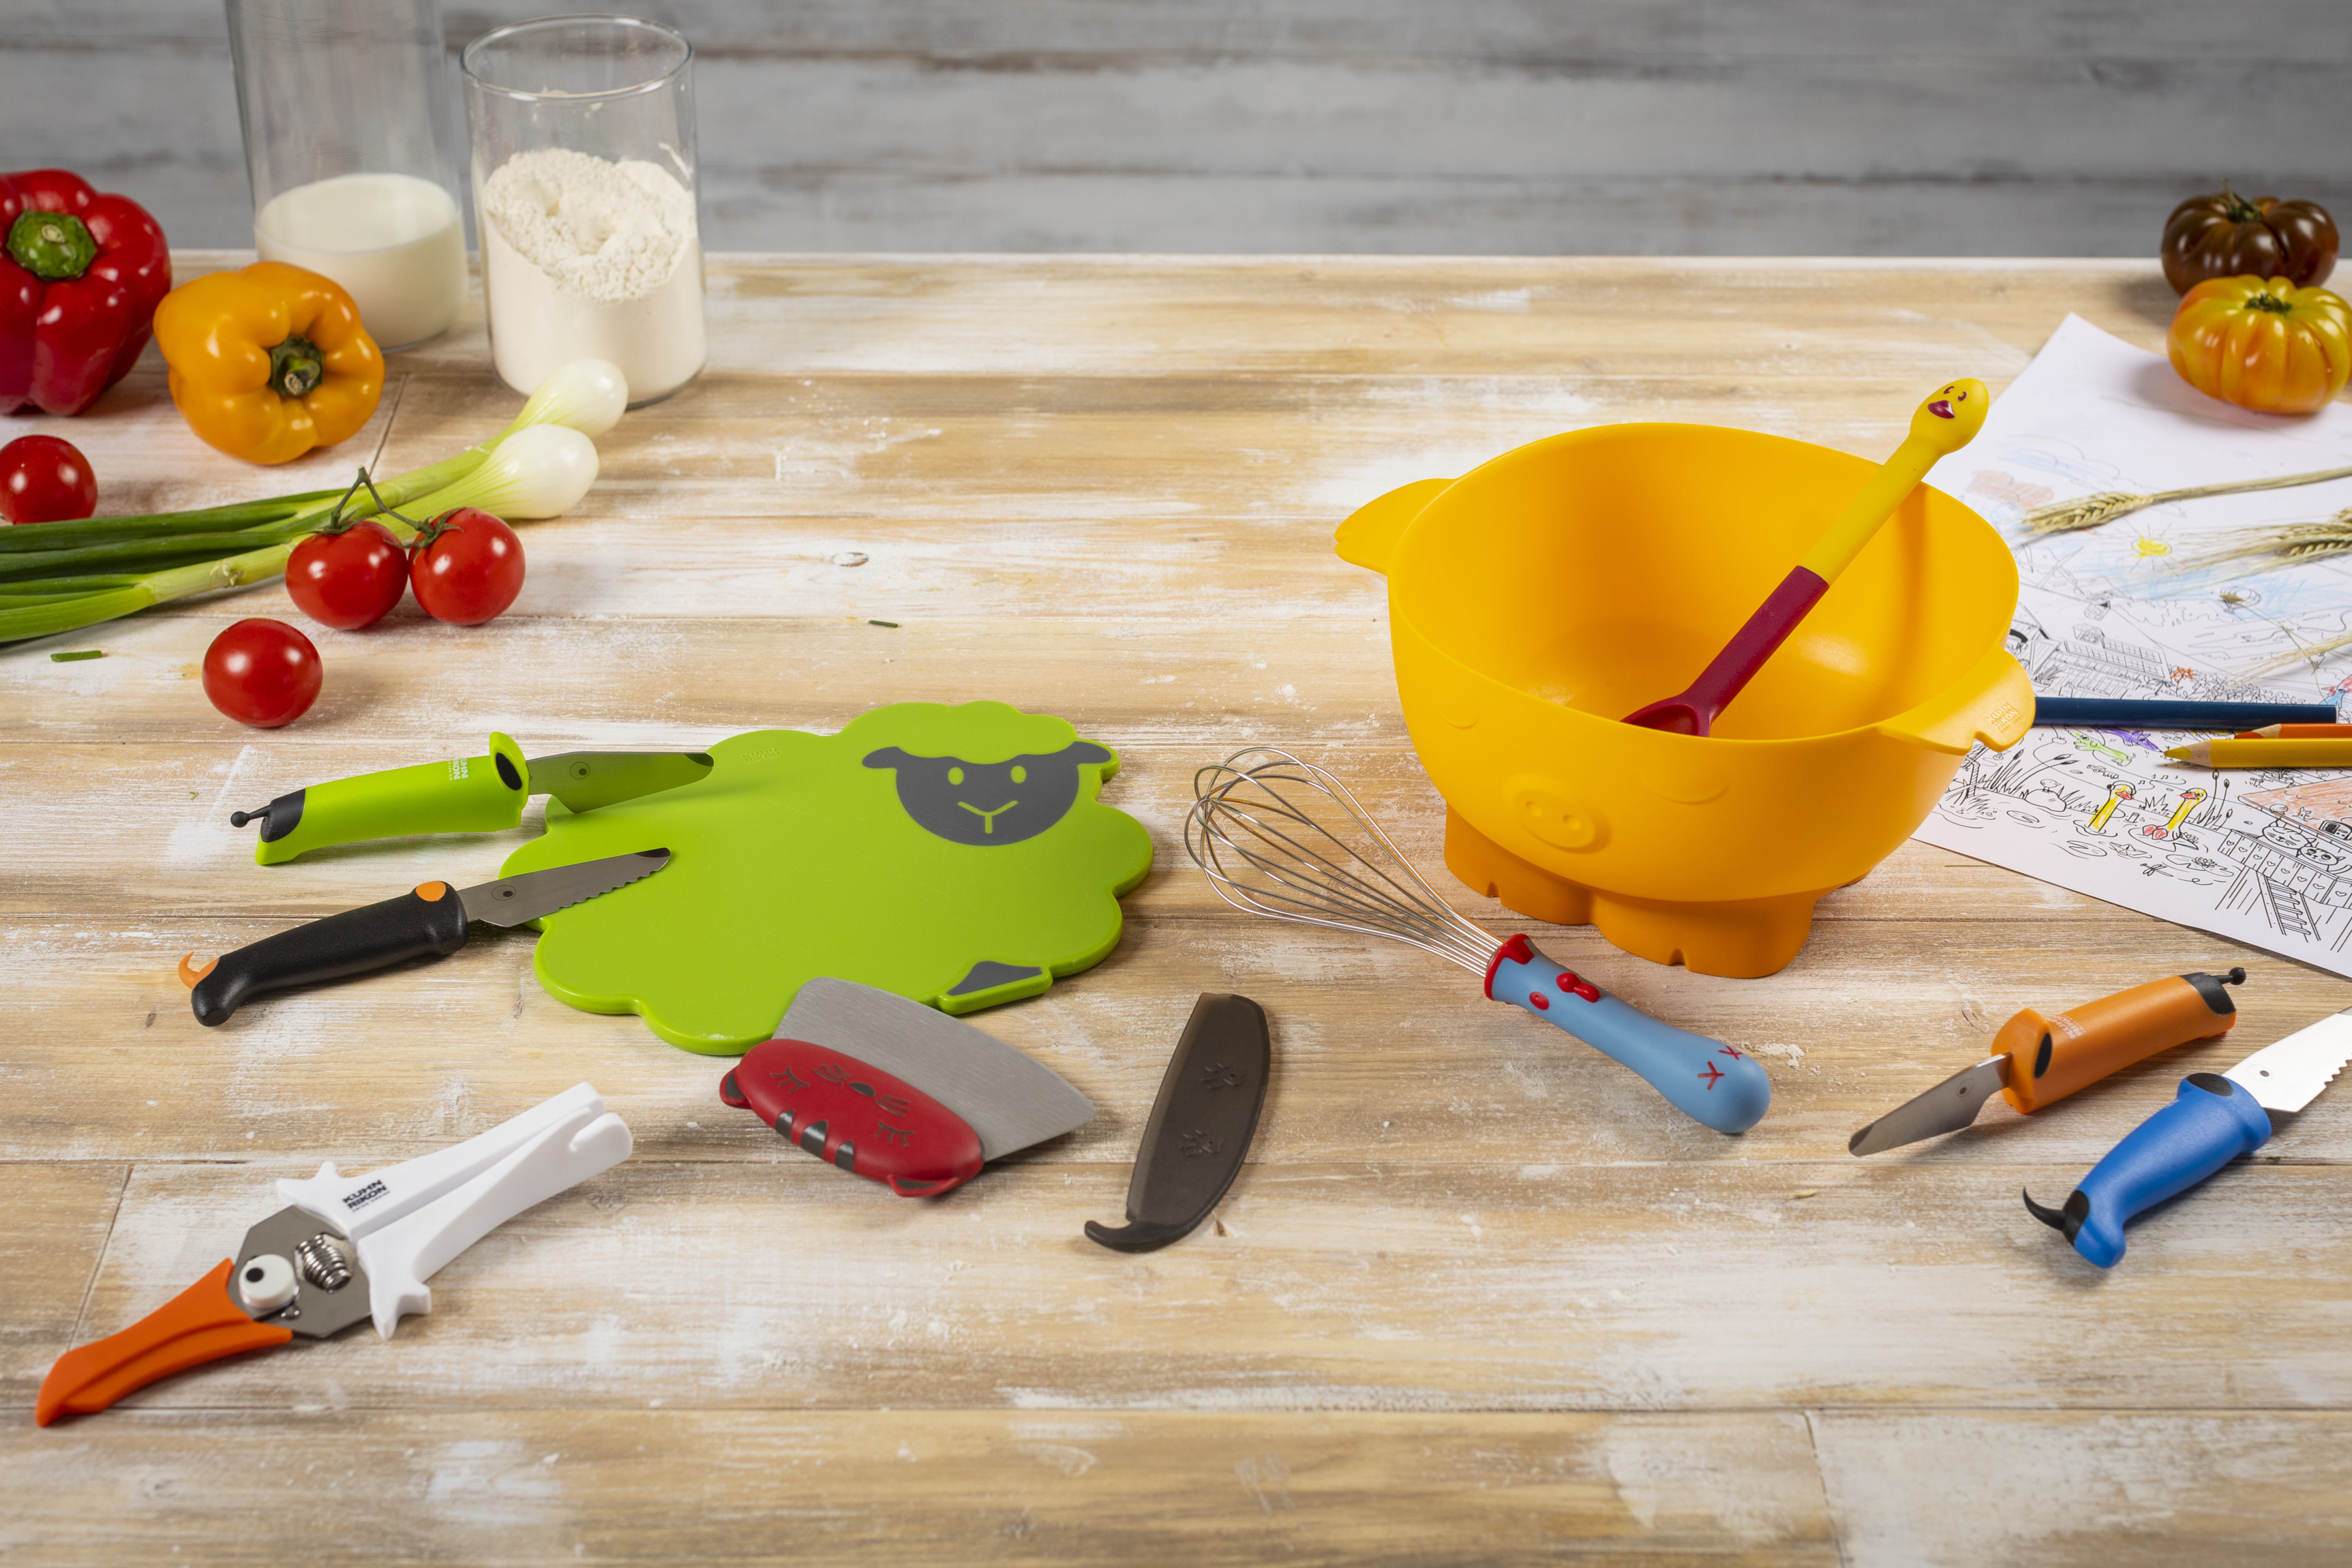 10 Fun Kitchen Utensils to Introduce Your Kids to The Joy of Cooking —  Eatwell101